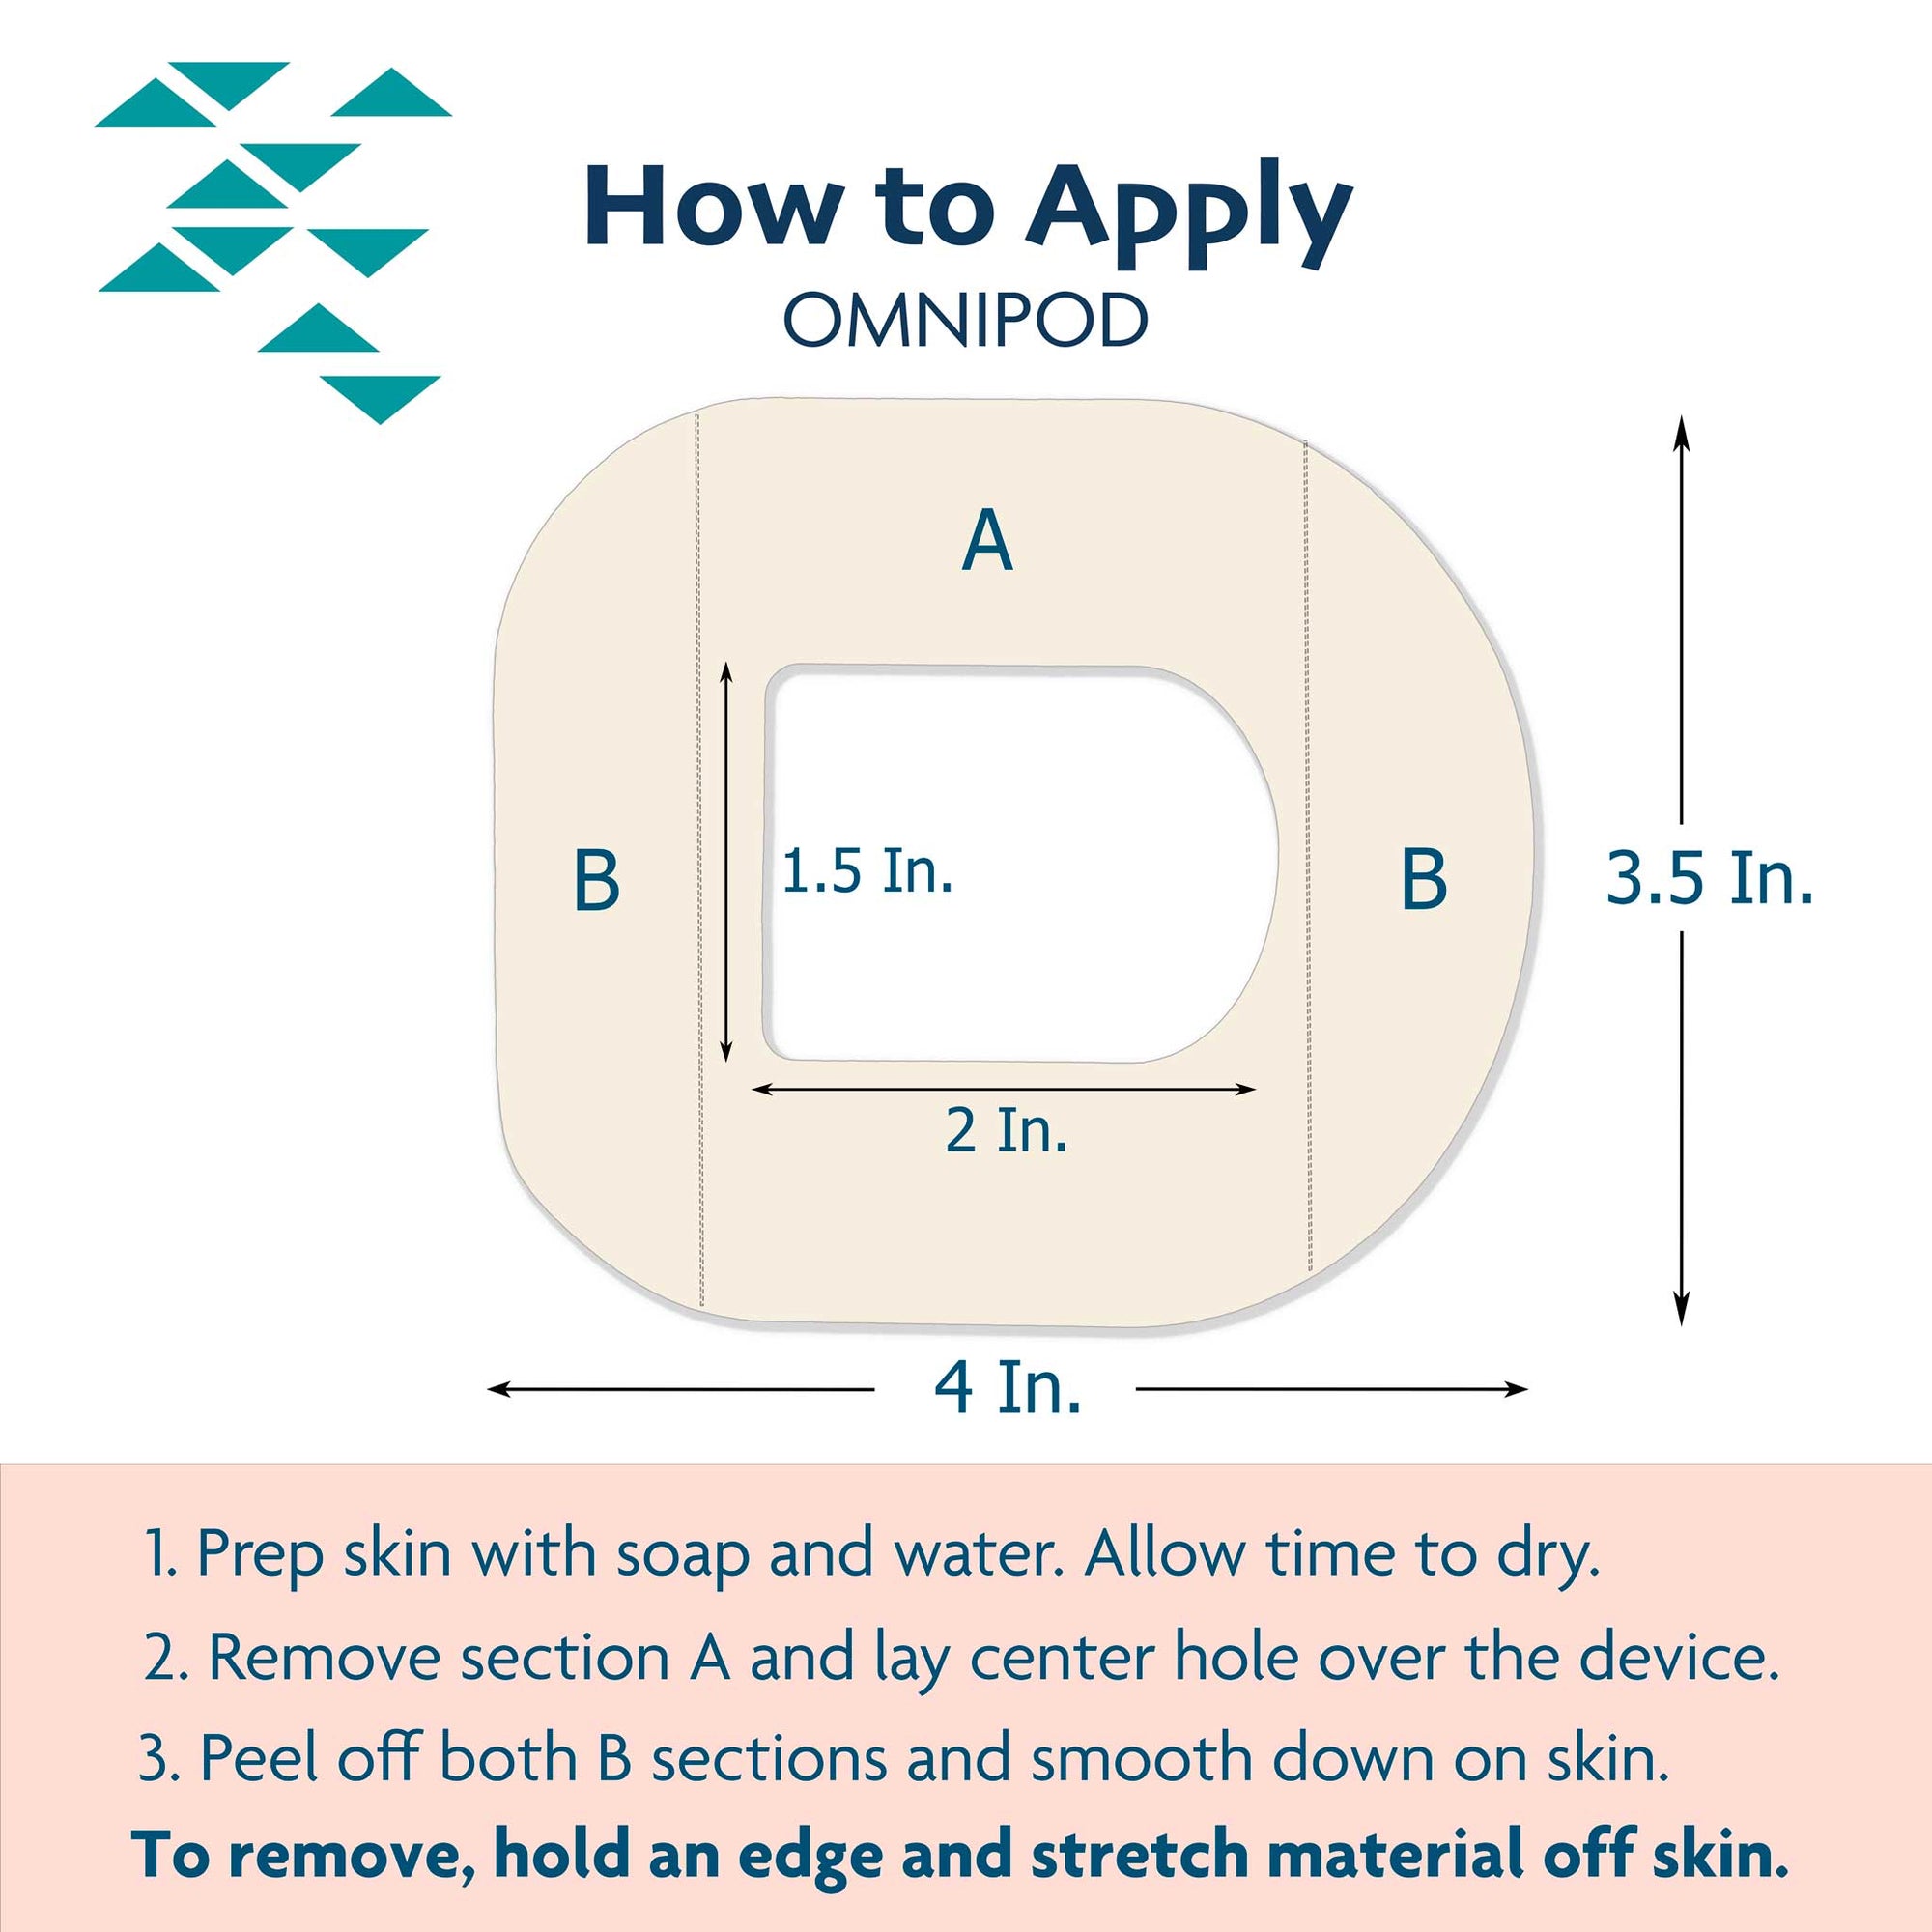 Expressionmed Omnipod Patch Application Instructions and Dimensions